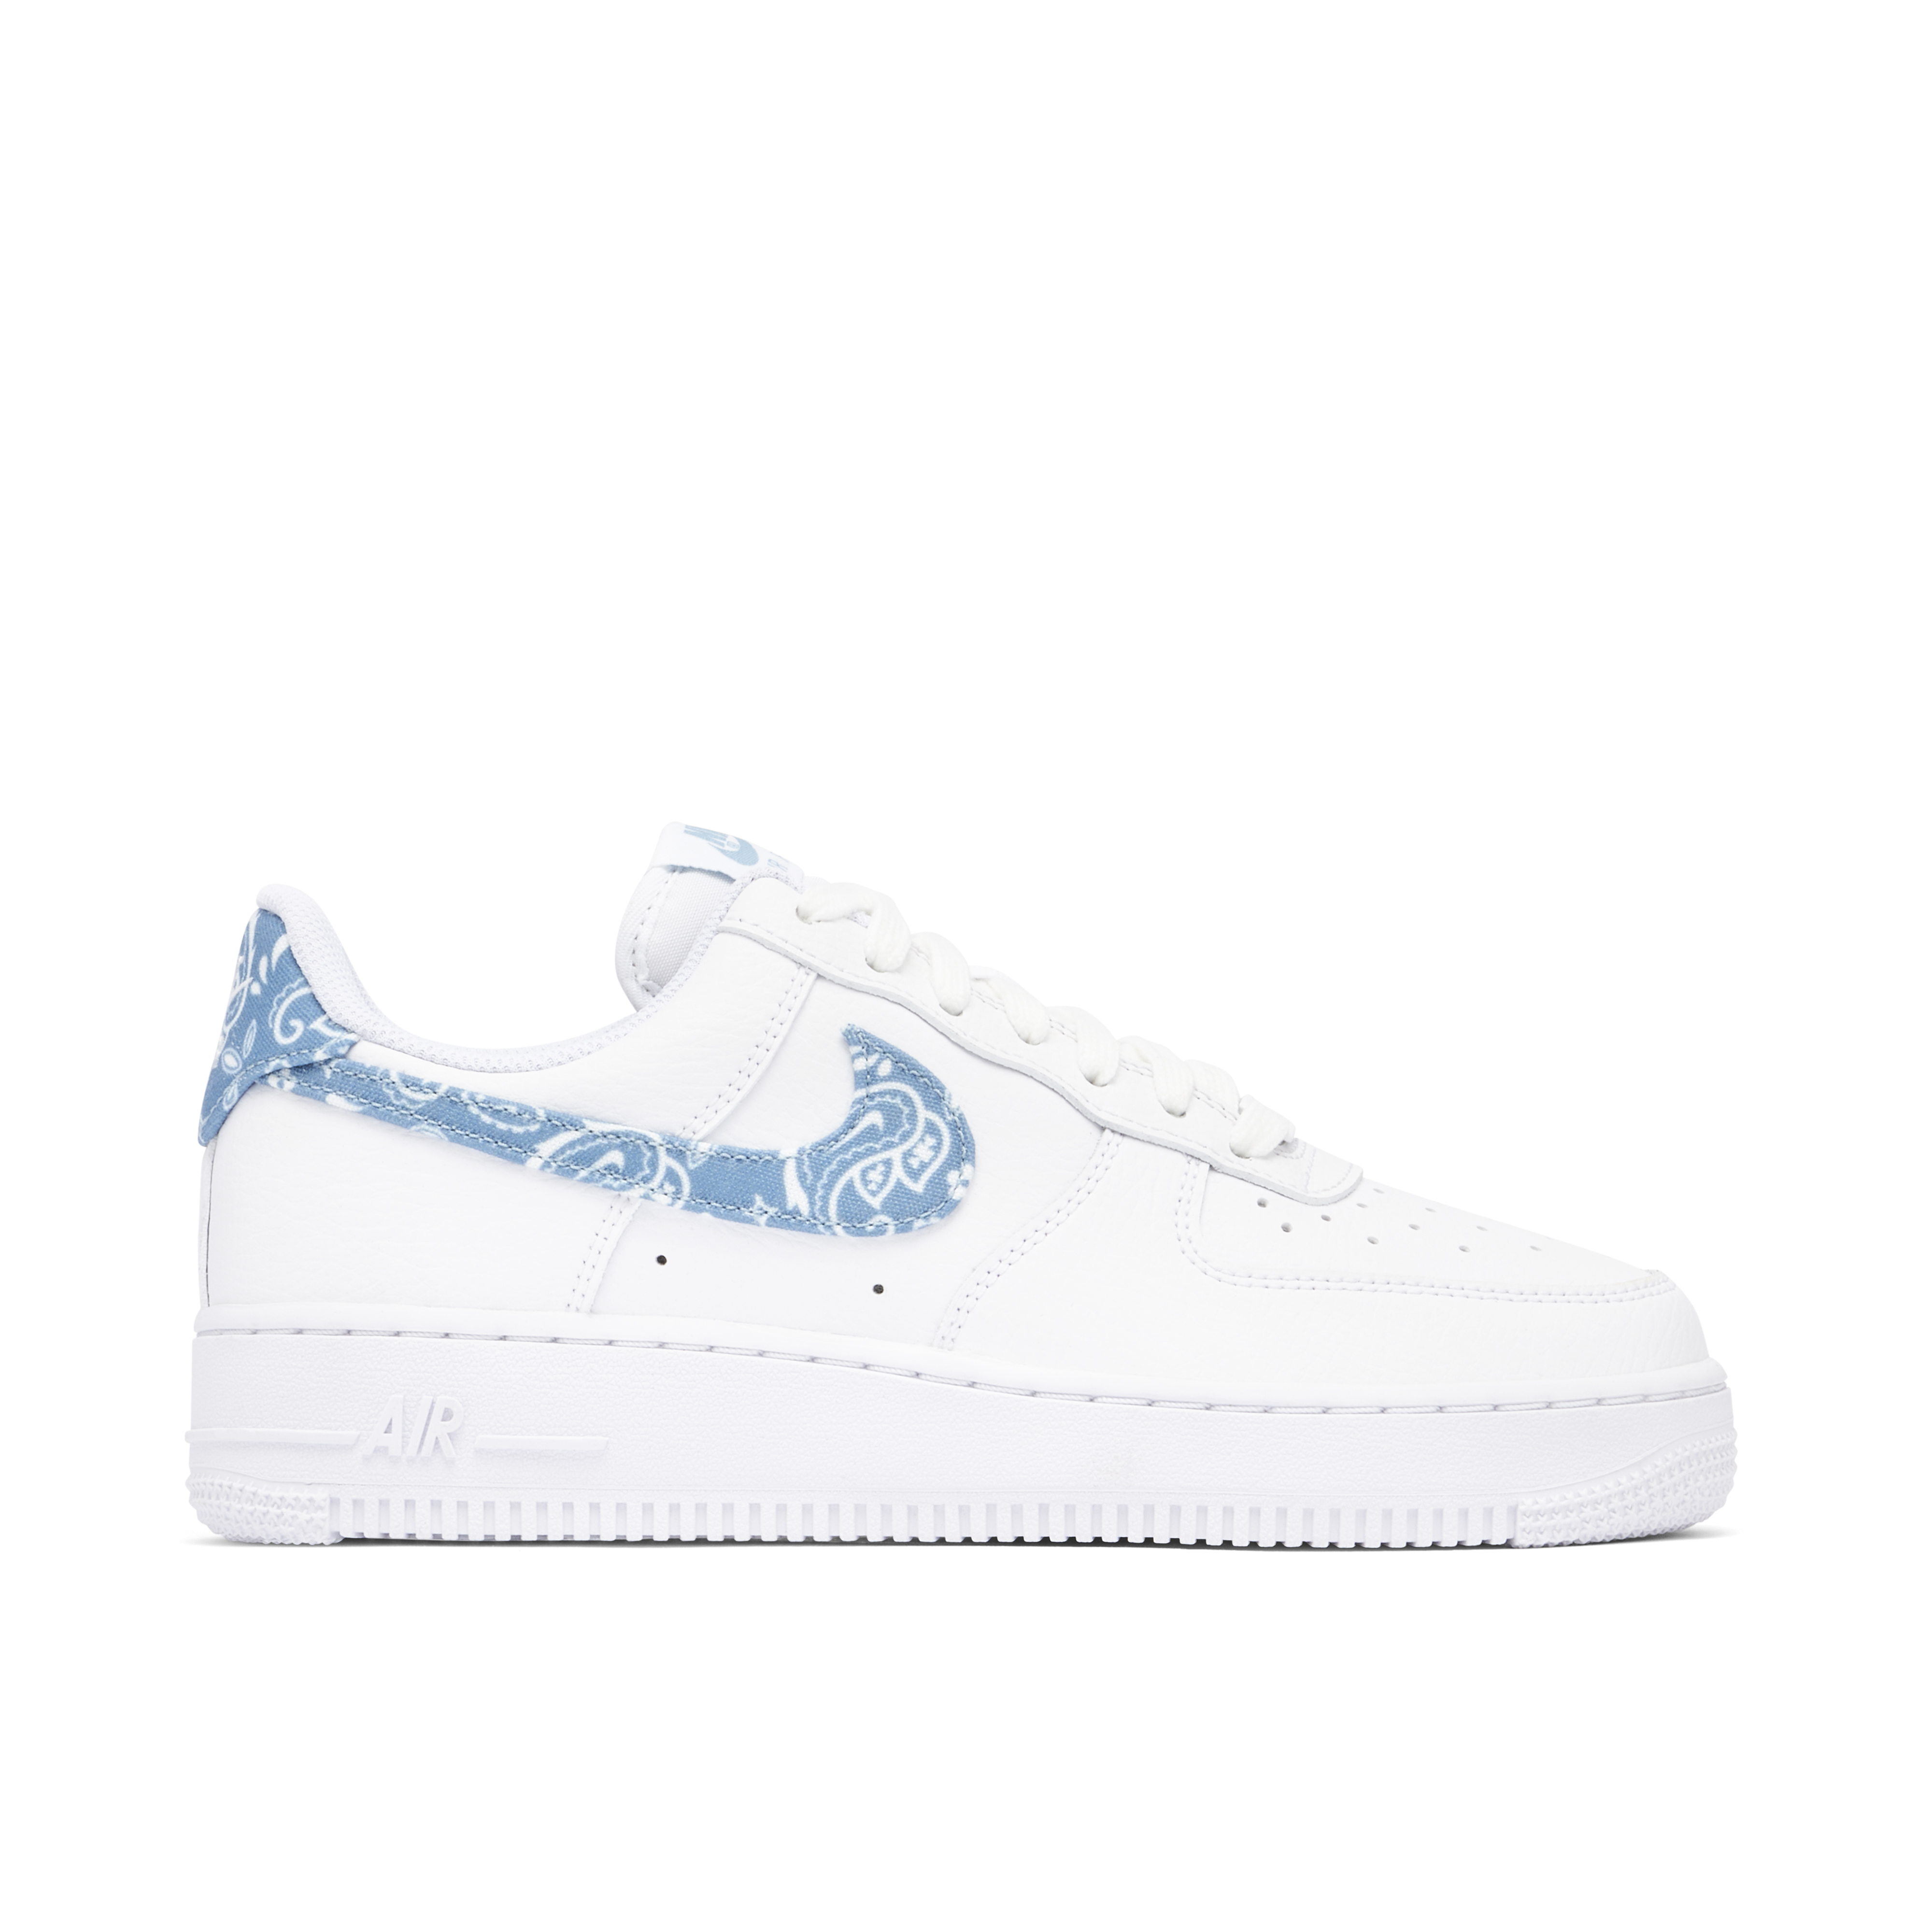 Nike Air Force 1 Low '07 Essential White Worn Blue Paisley ...